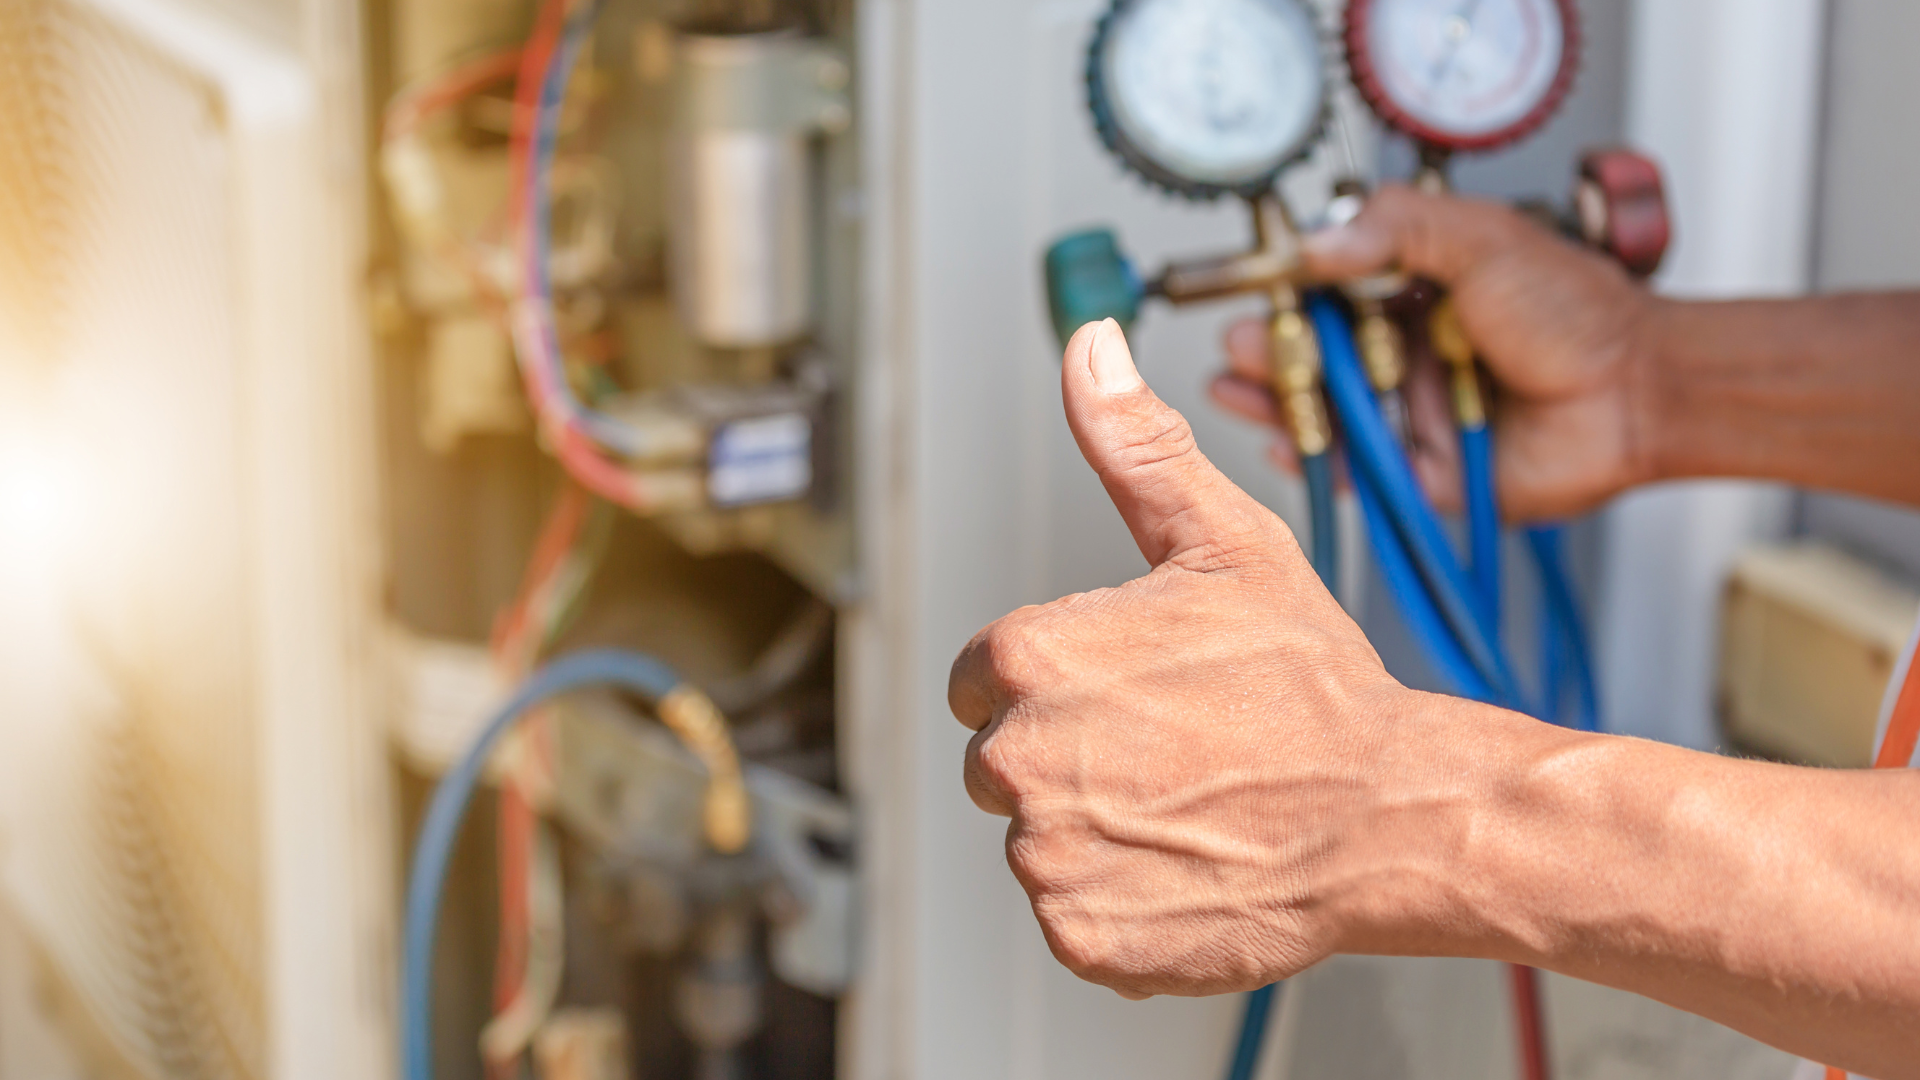 5 Reasons Why You Need To Have Your Furnace Safety Inspected